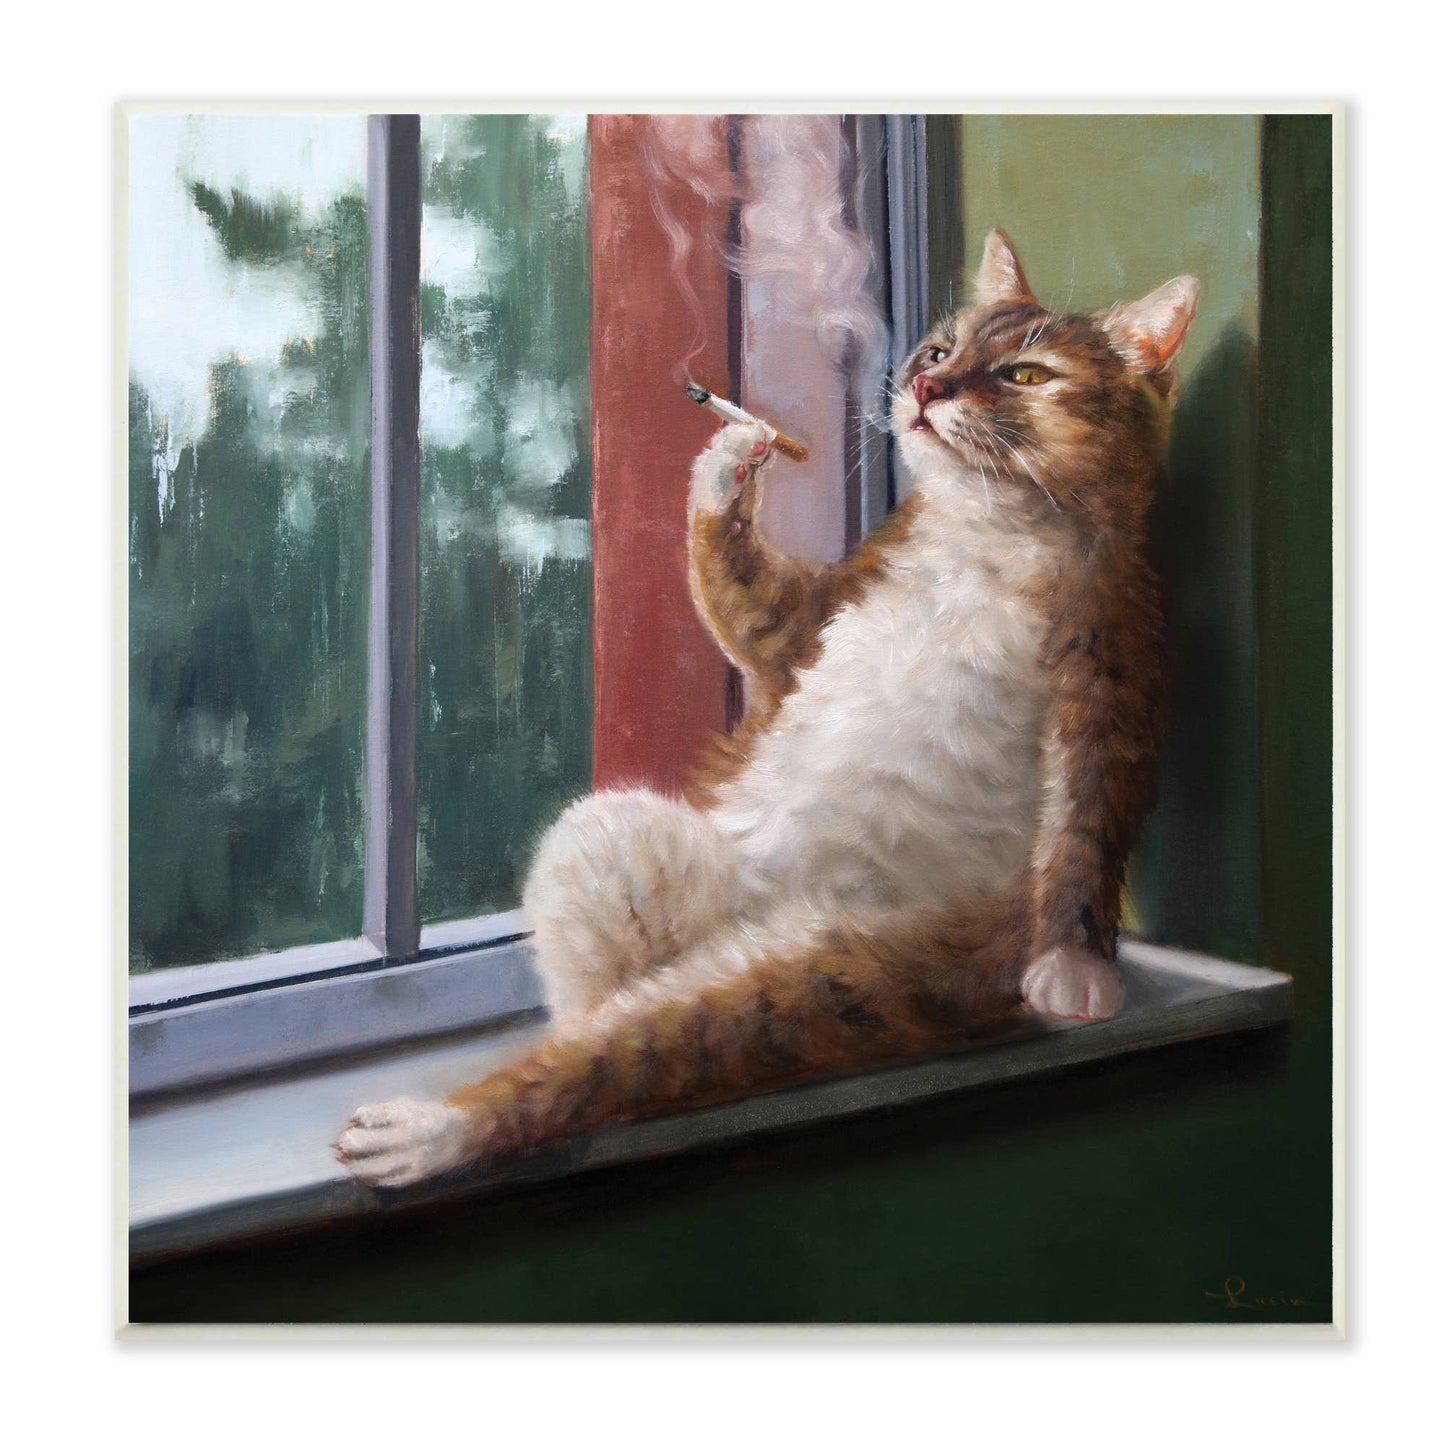 House Cat Smoking in Window Wall Plaque